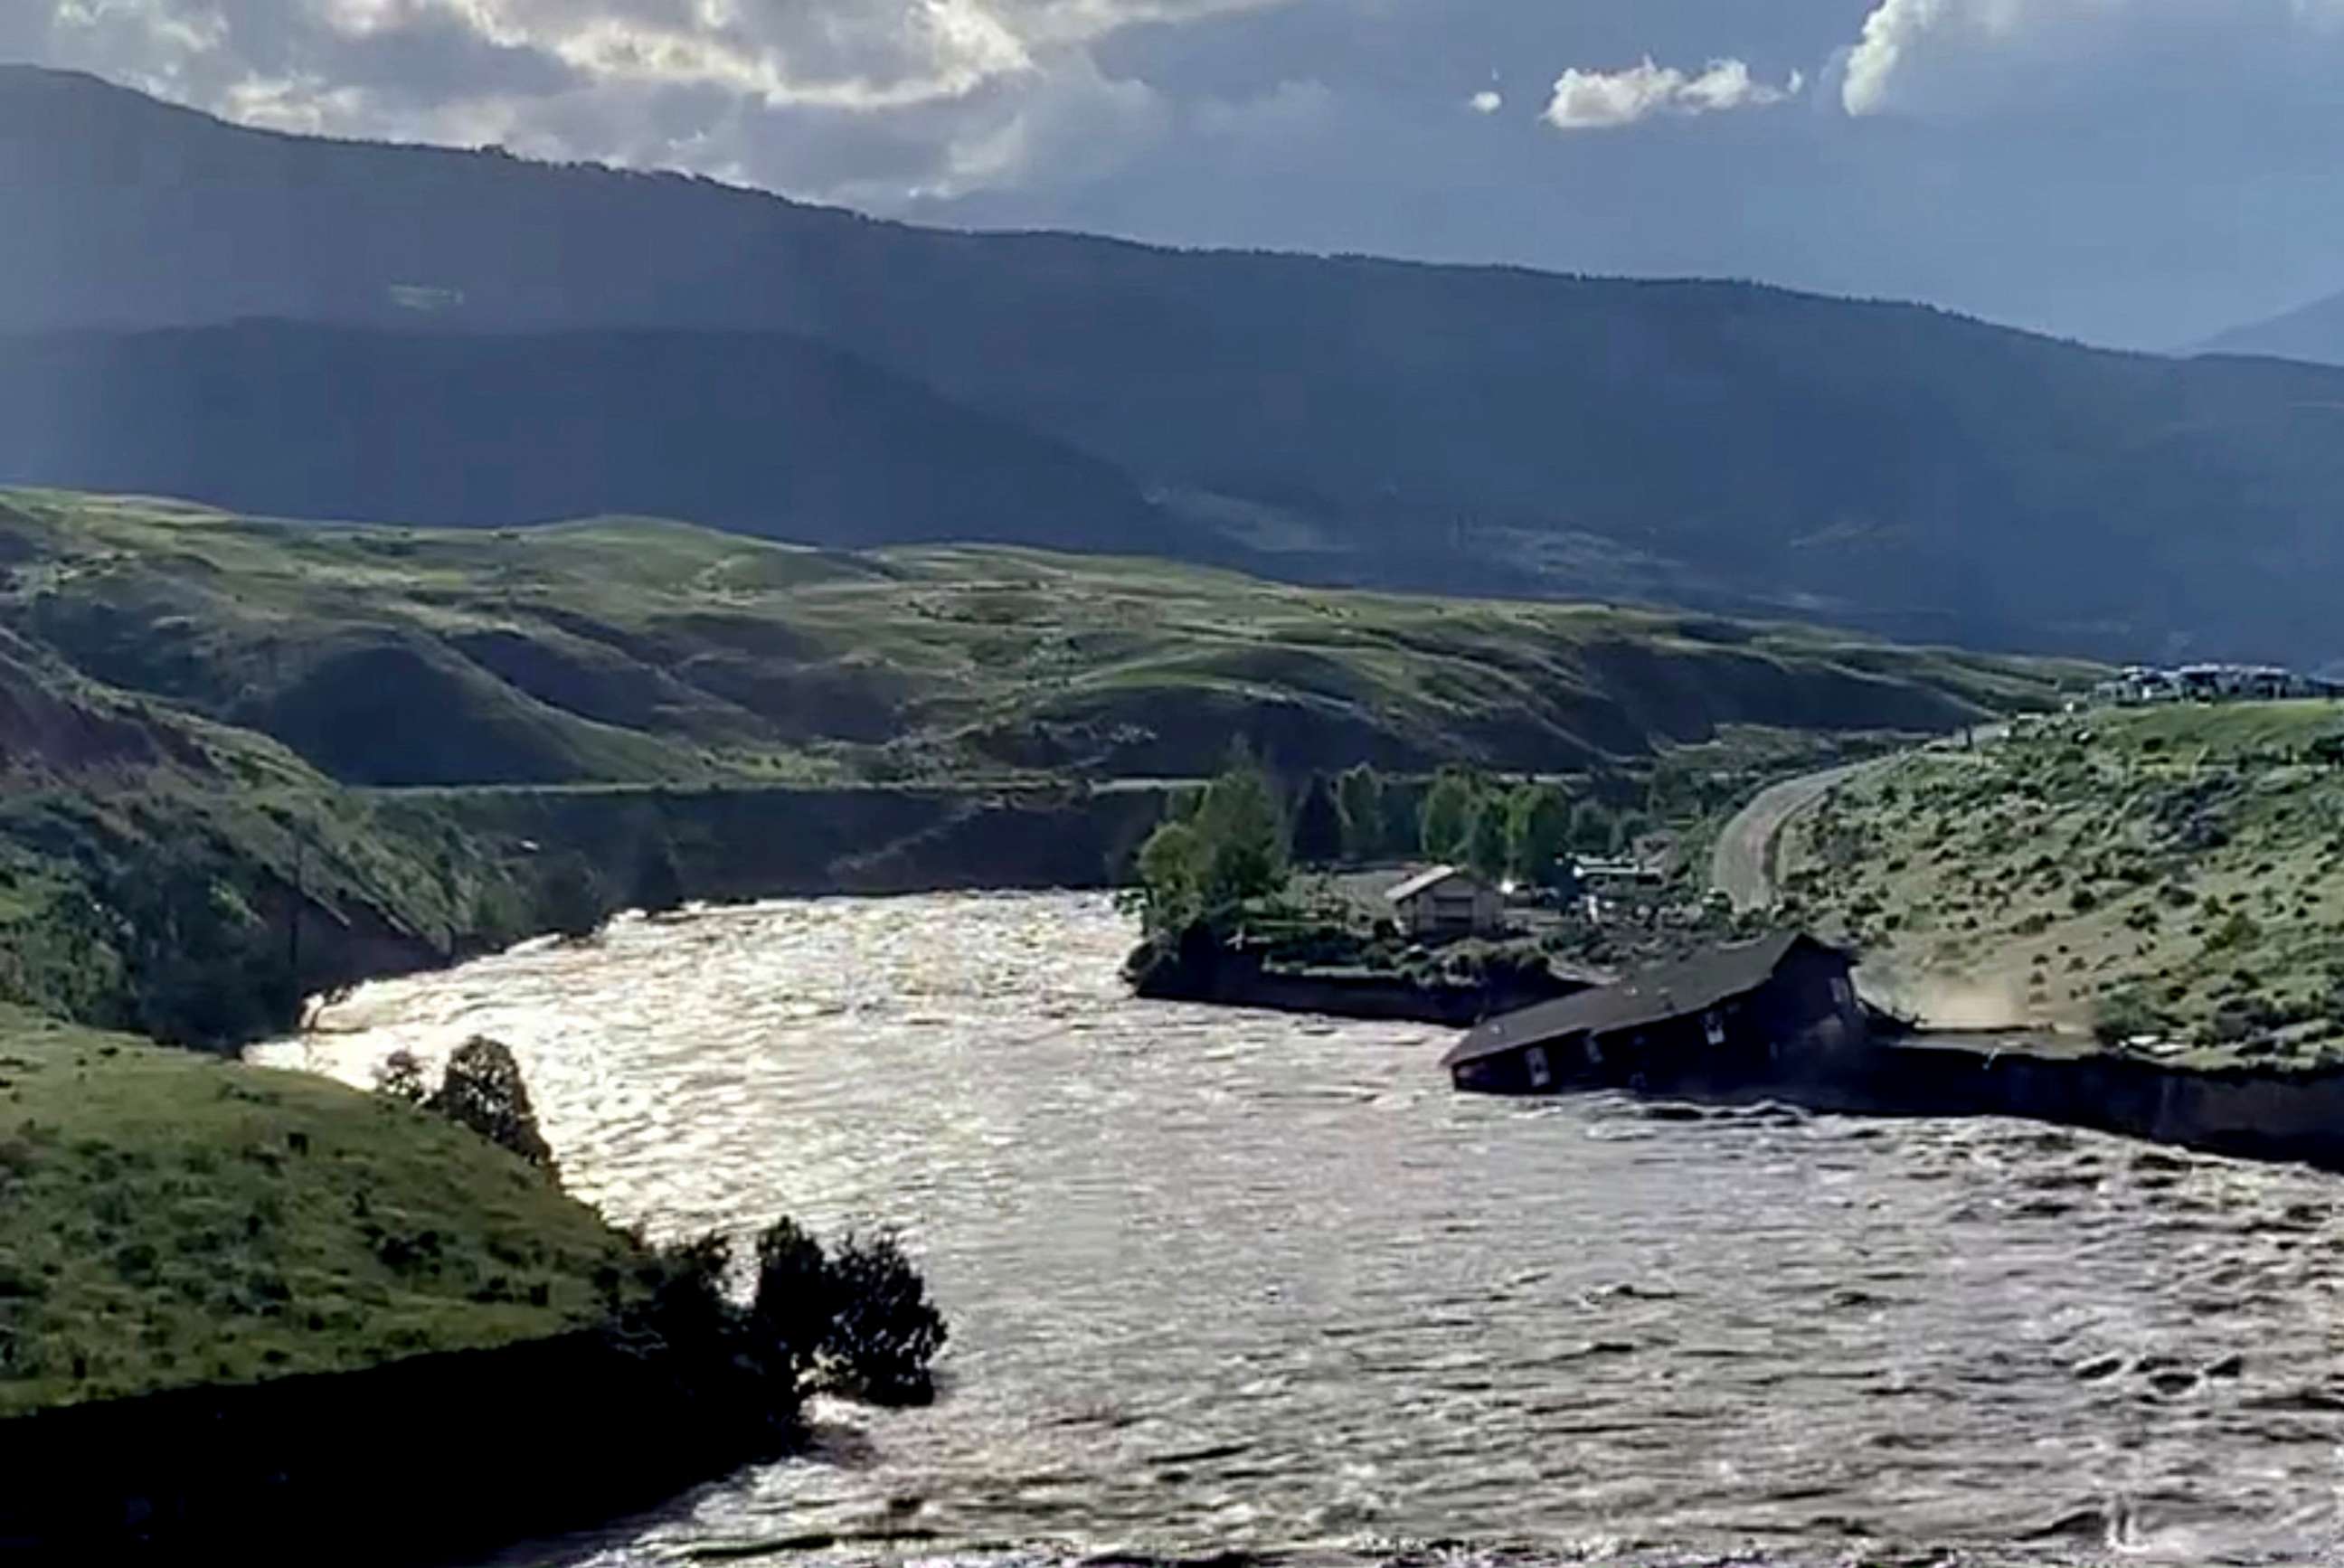 PHOTO: A house falls into the Yellowstone river due to flooding in Gardiner, Mont., June 13, 2022 in this screen grab obtained from a social media video.